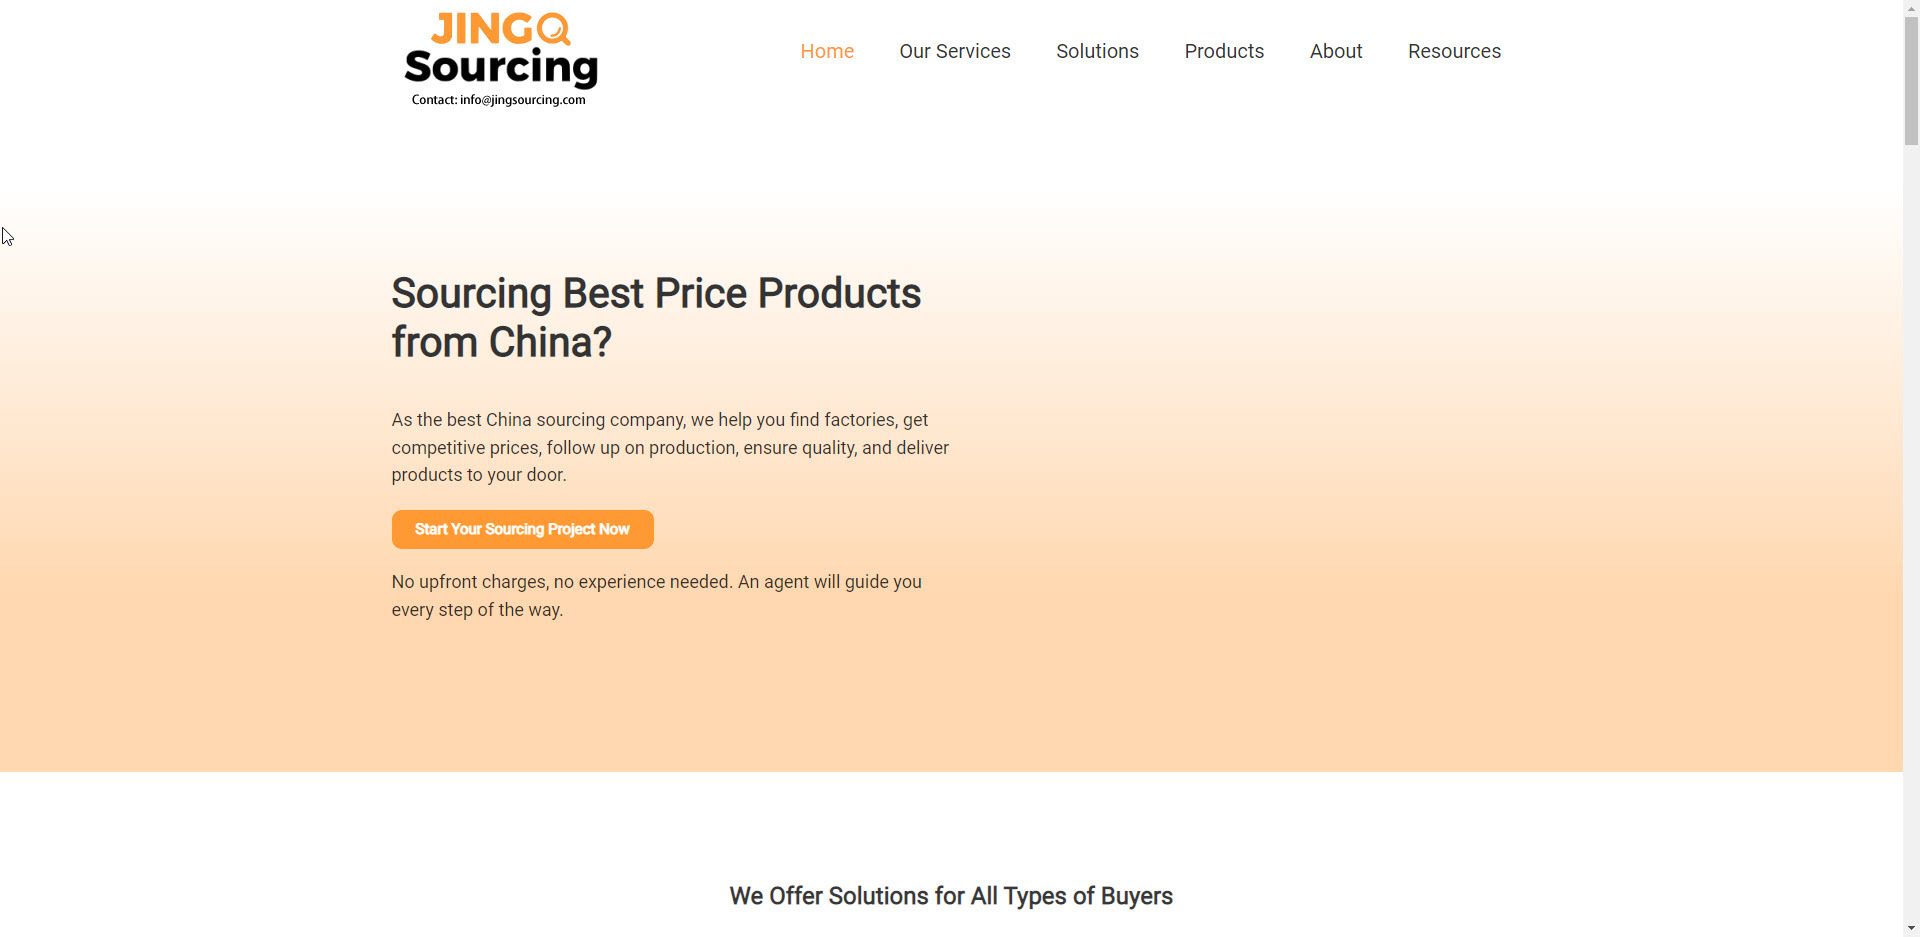 Website Home Page of Jingsourcing